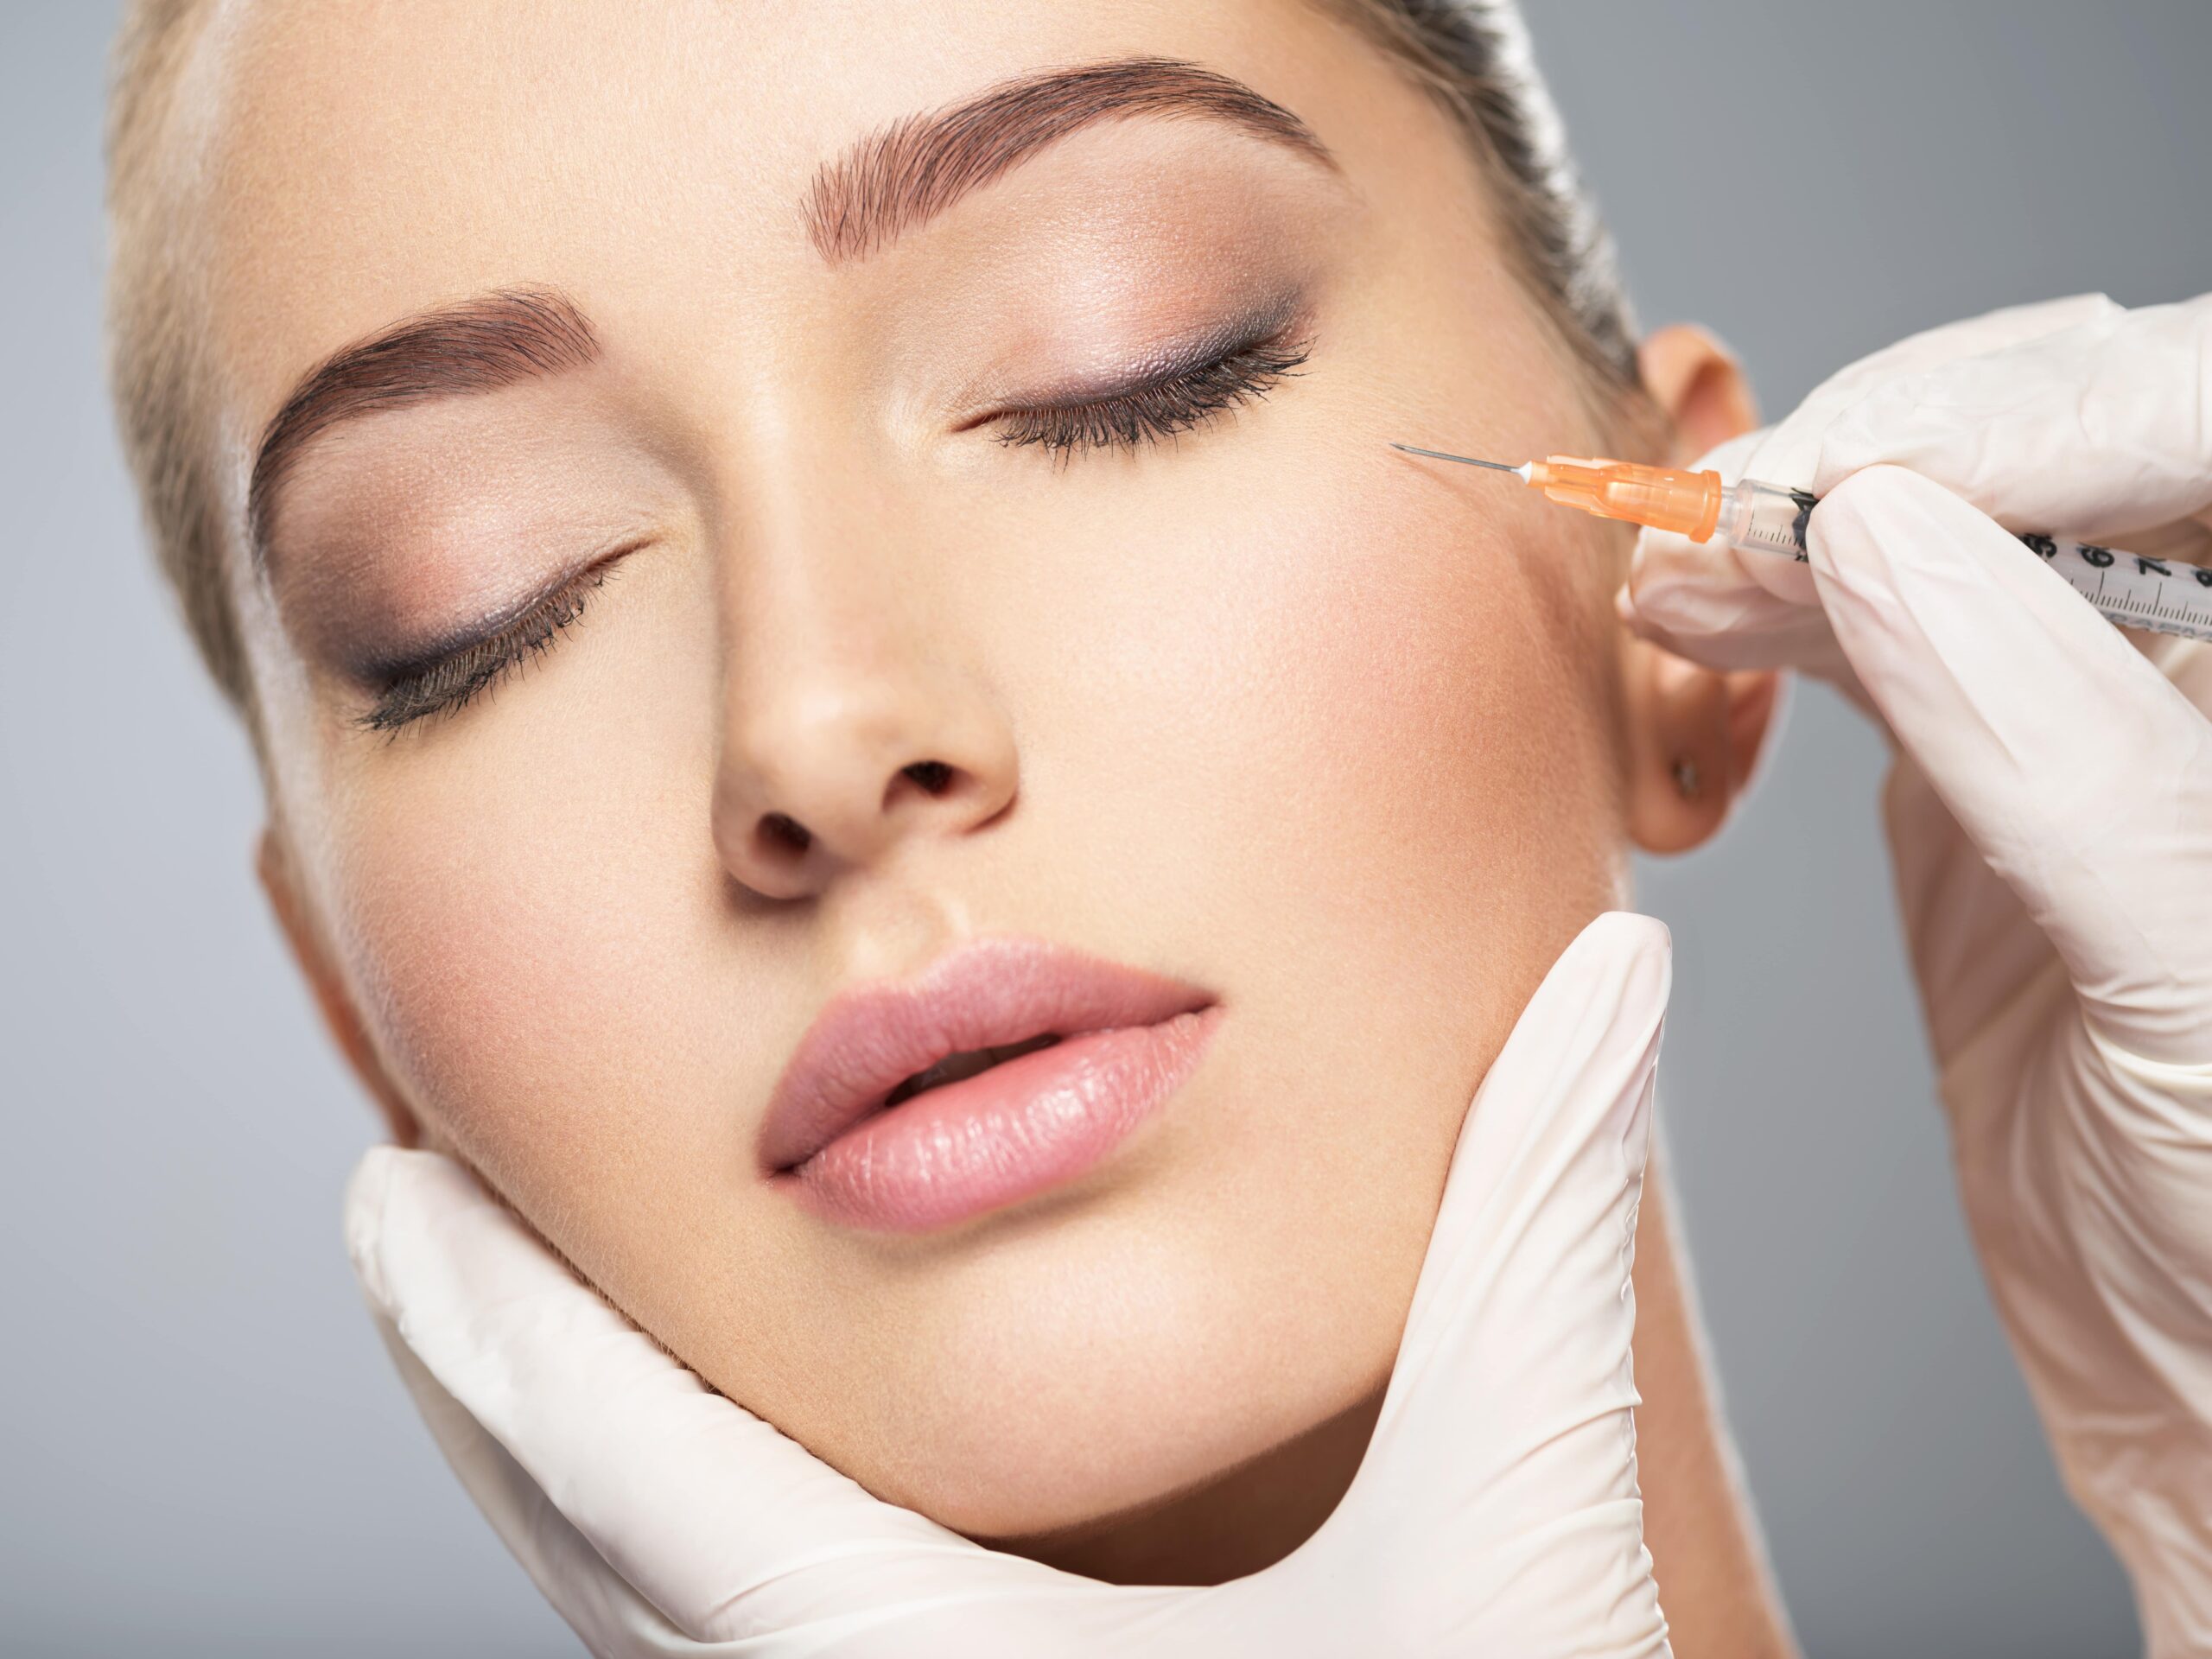 Anti Wrinkle and Dermal Filler Injections – Foundation Training